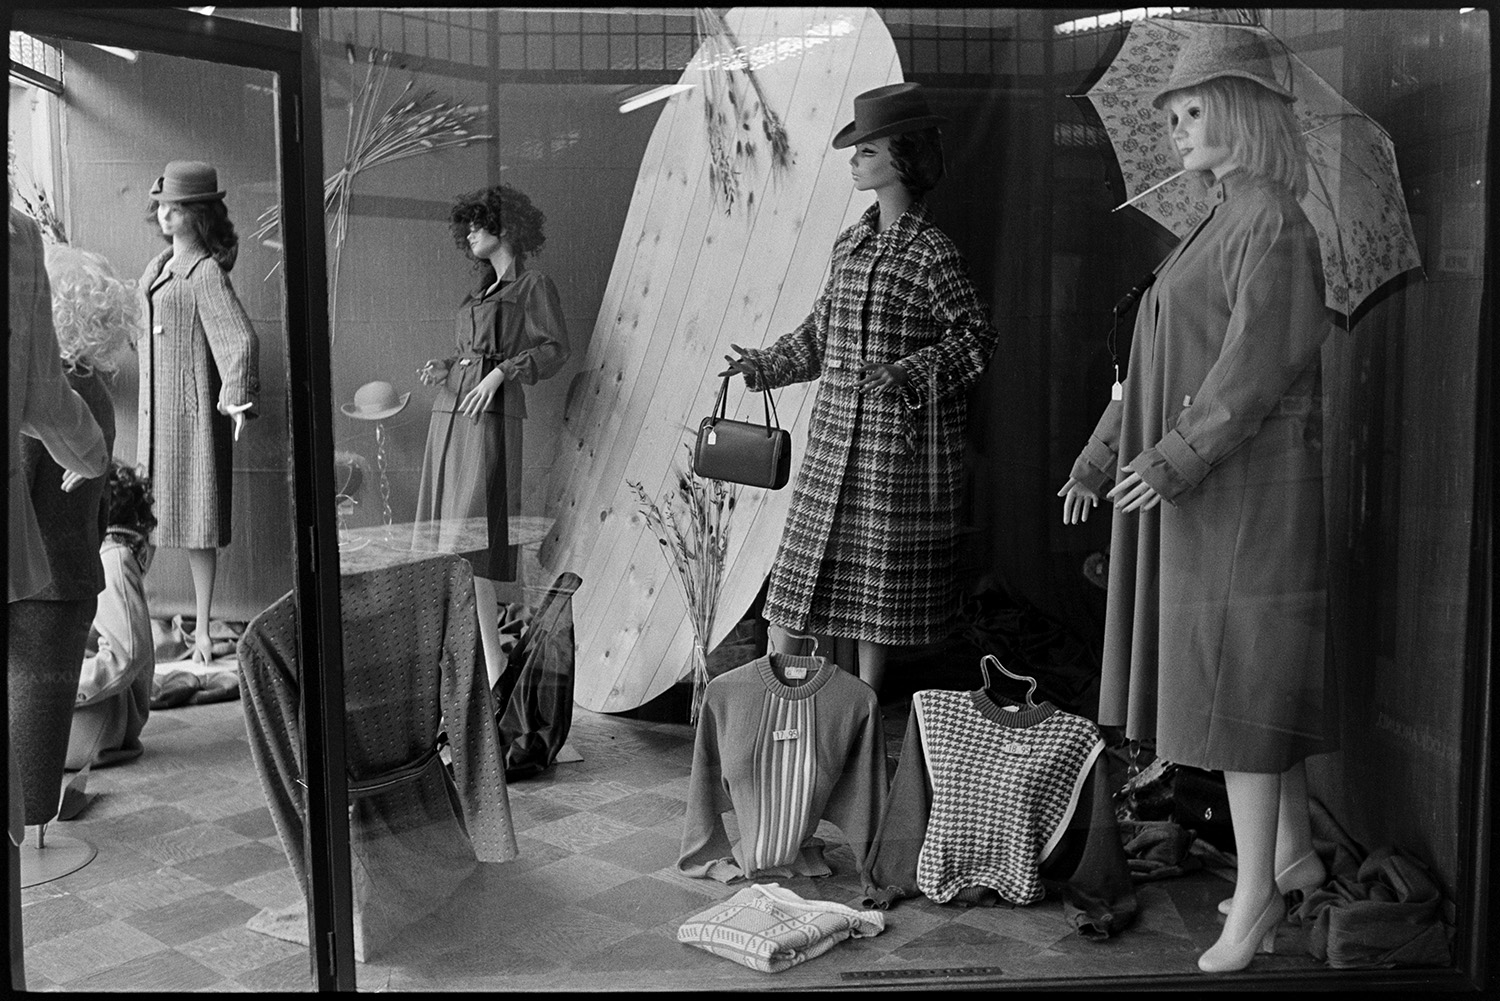 Window display of clothes shop. 
[The front window display in Trapnells clothes shop in Bideford High Street. Mannequins are modelling coats, hats, bags and umbrellas. Jumpers are also on display in the window.]